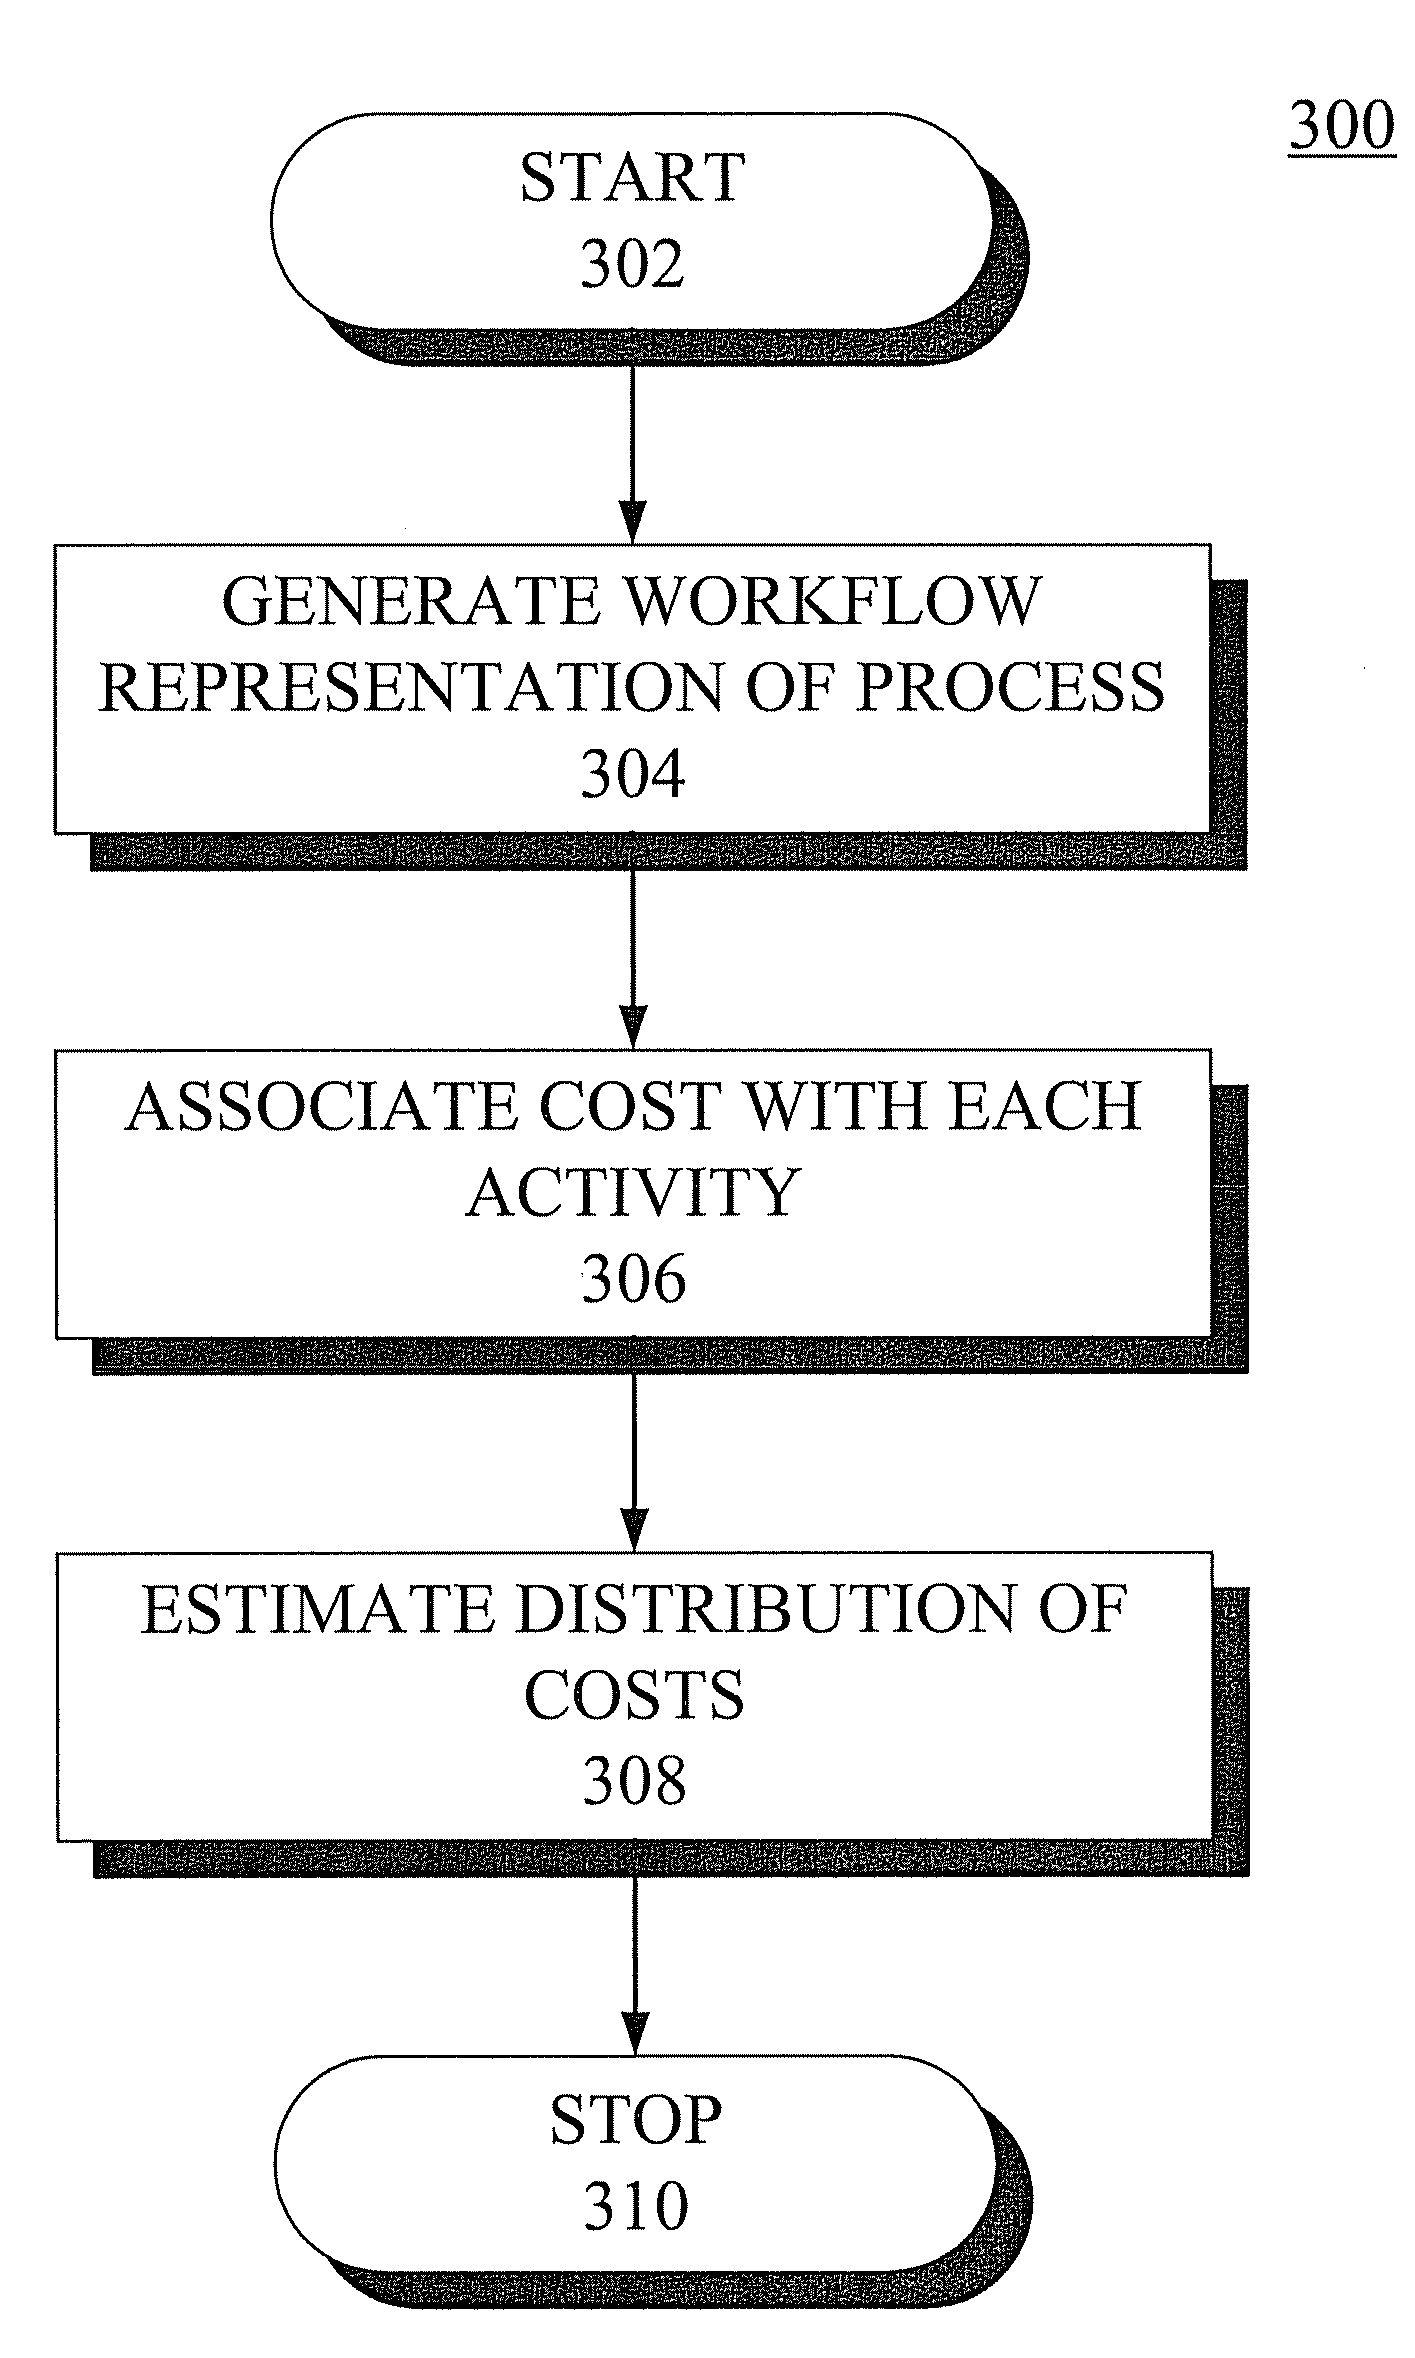 System and methods for process analysis, simulation, and optimization based on activity-based cost information